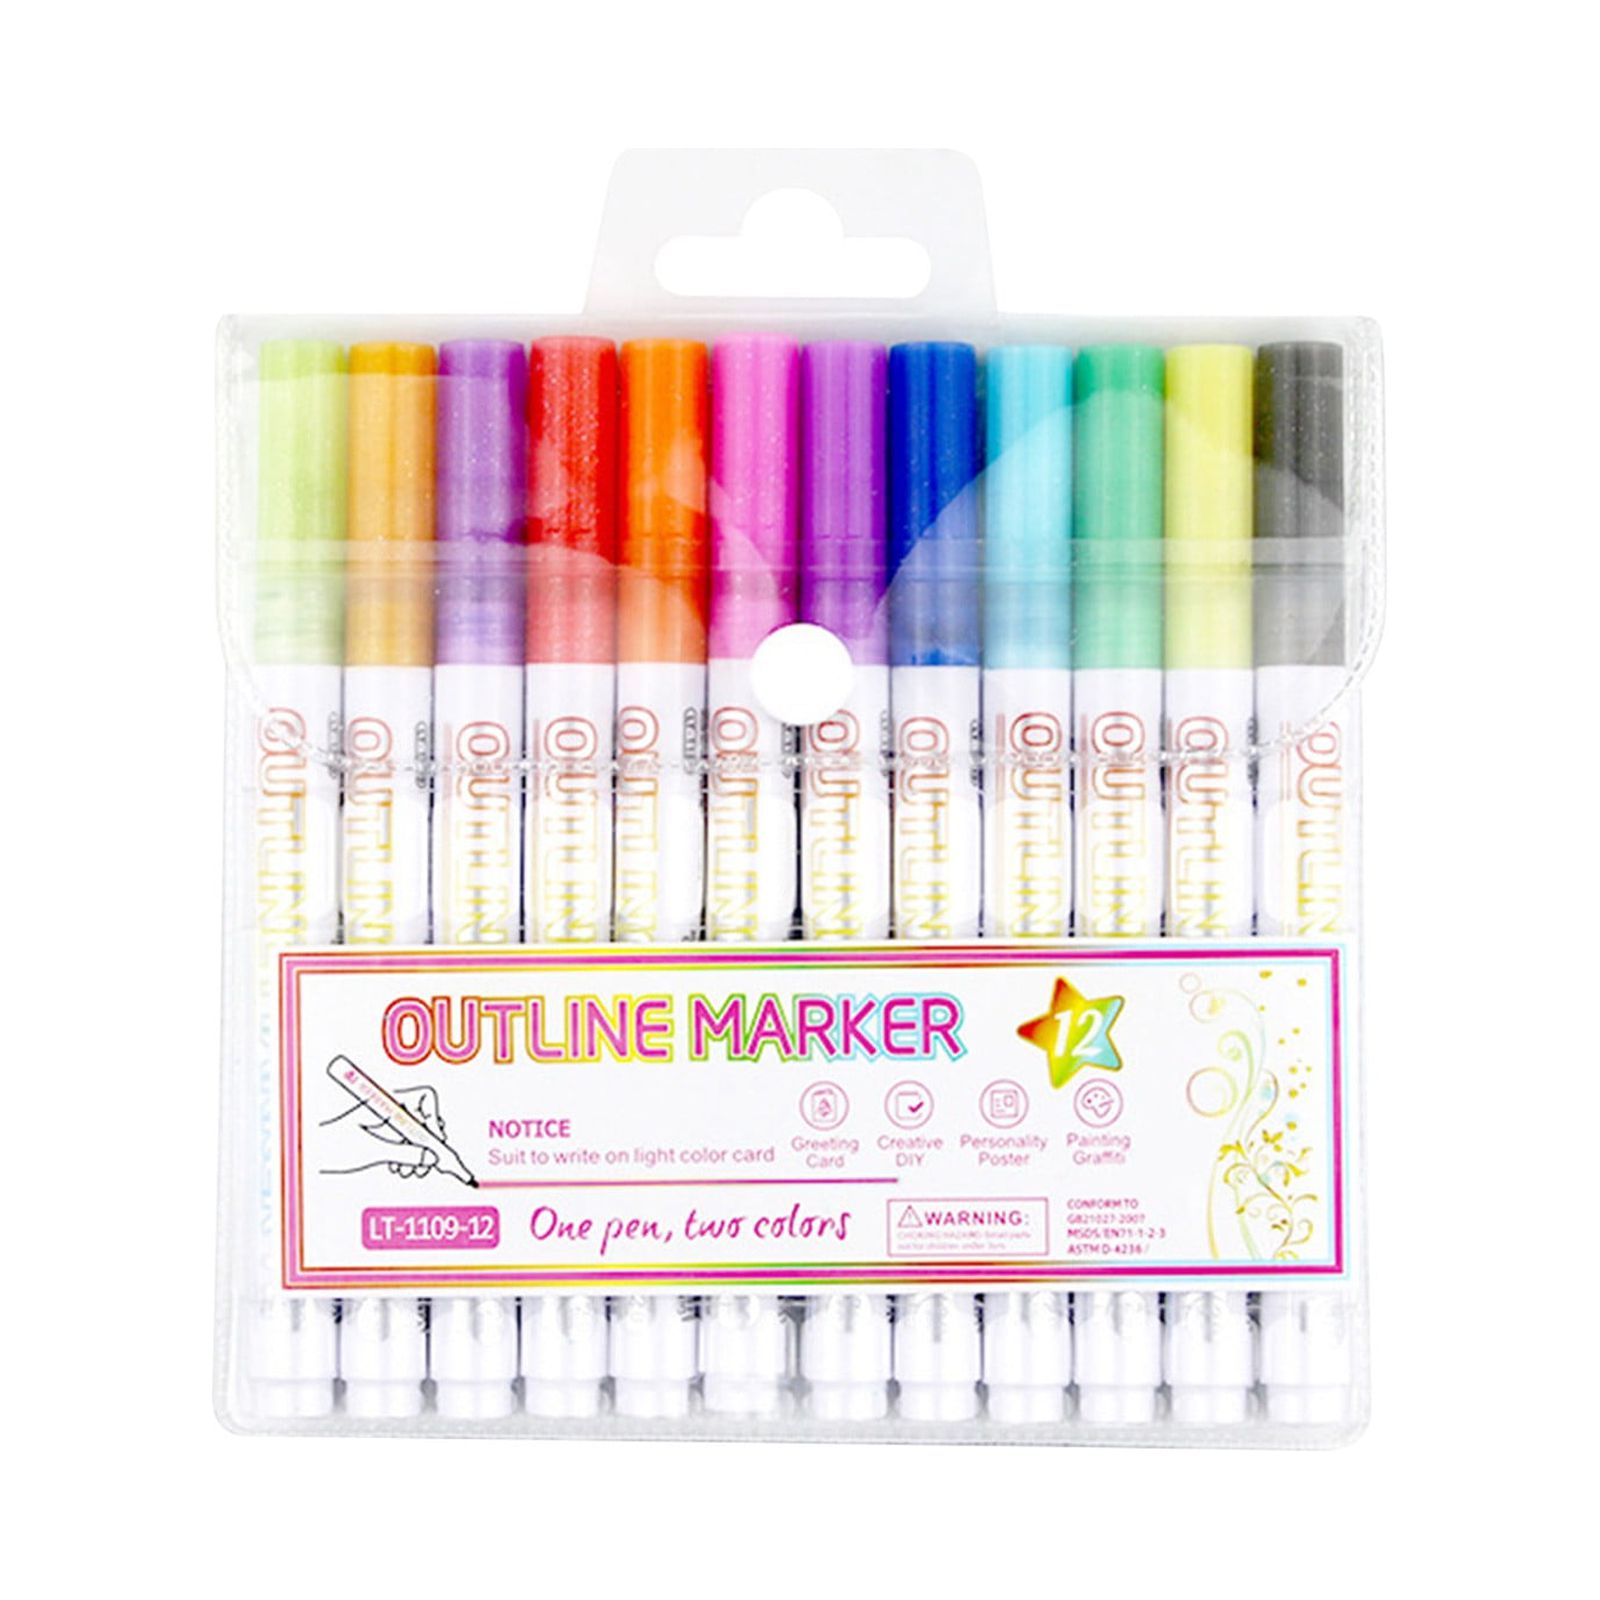 Christmas Clearance Holiday Deals! Christmas Decorations WJSXC Marker Pen  For Highlight, New Double Line Self-outline Marker Pen Set Glitter Gel